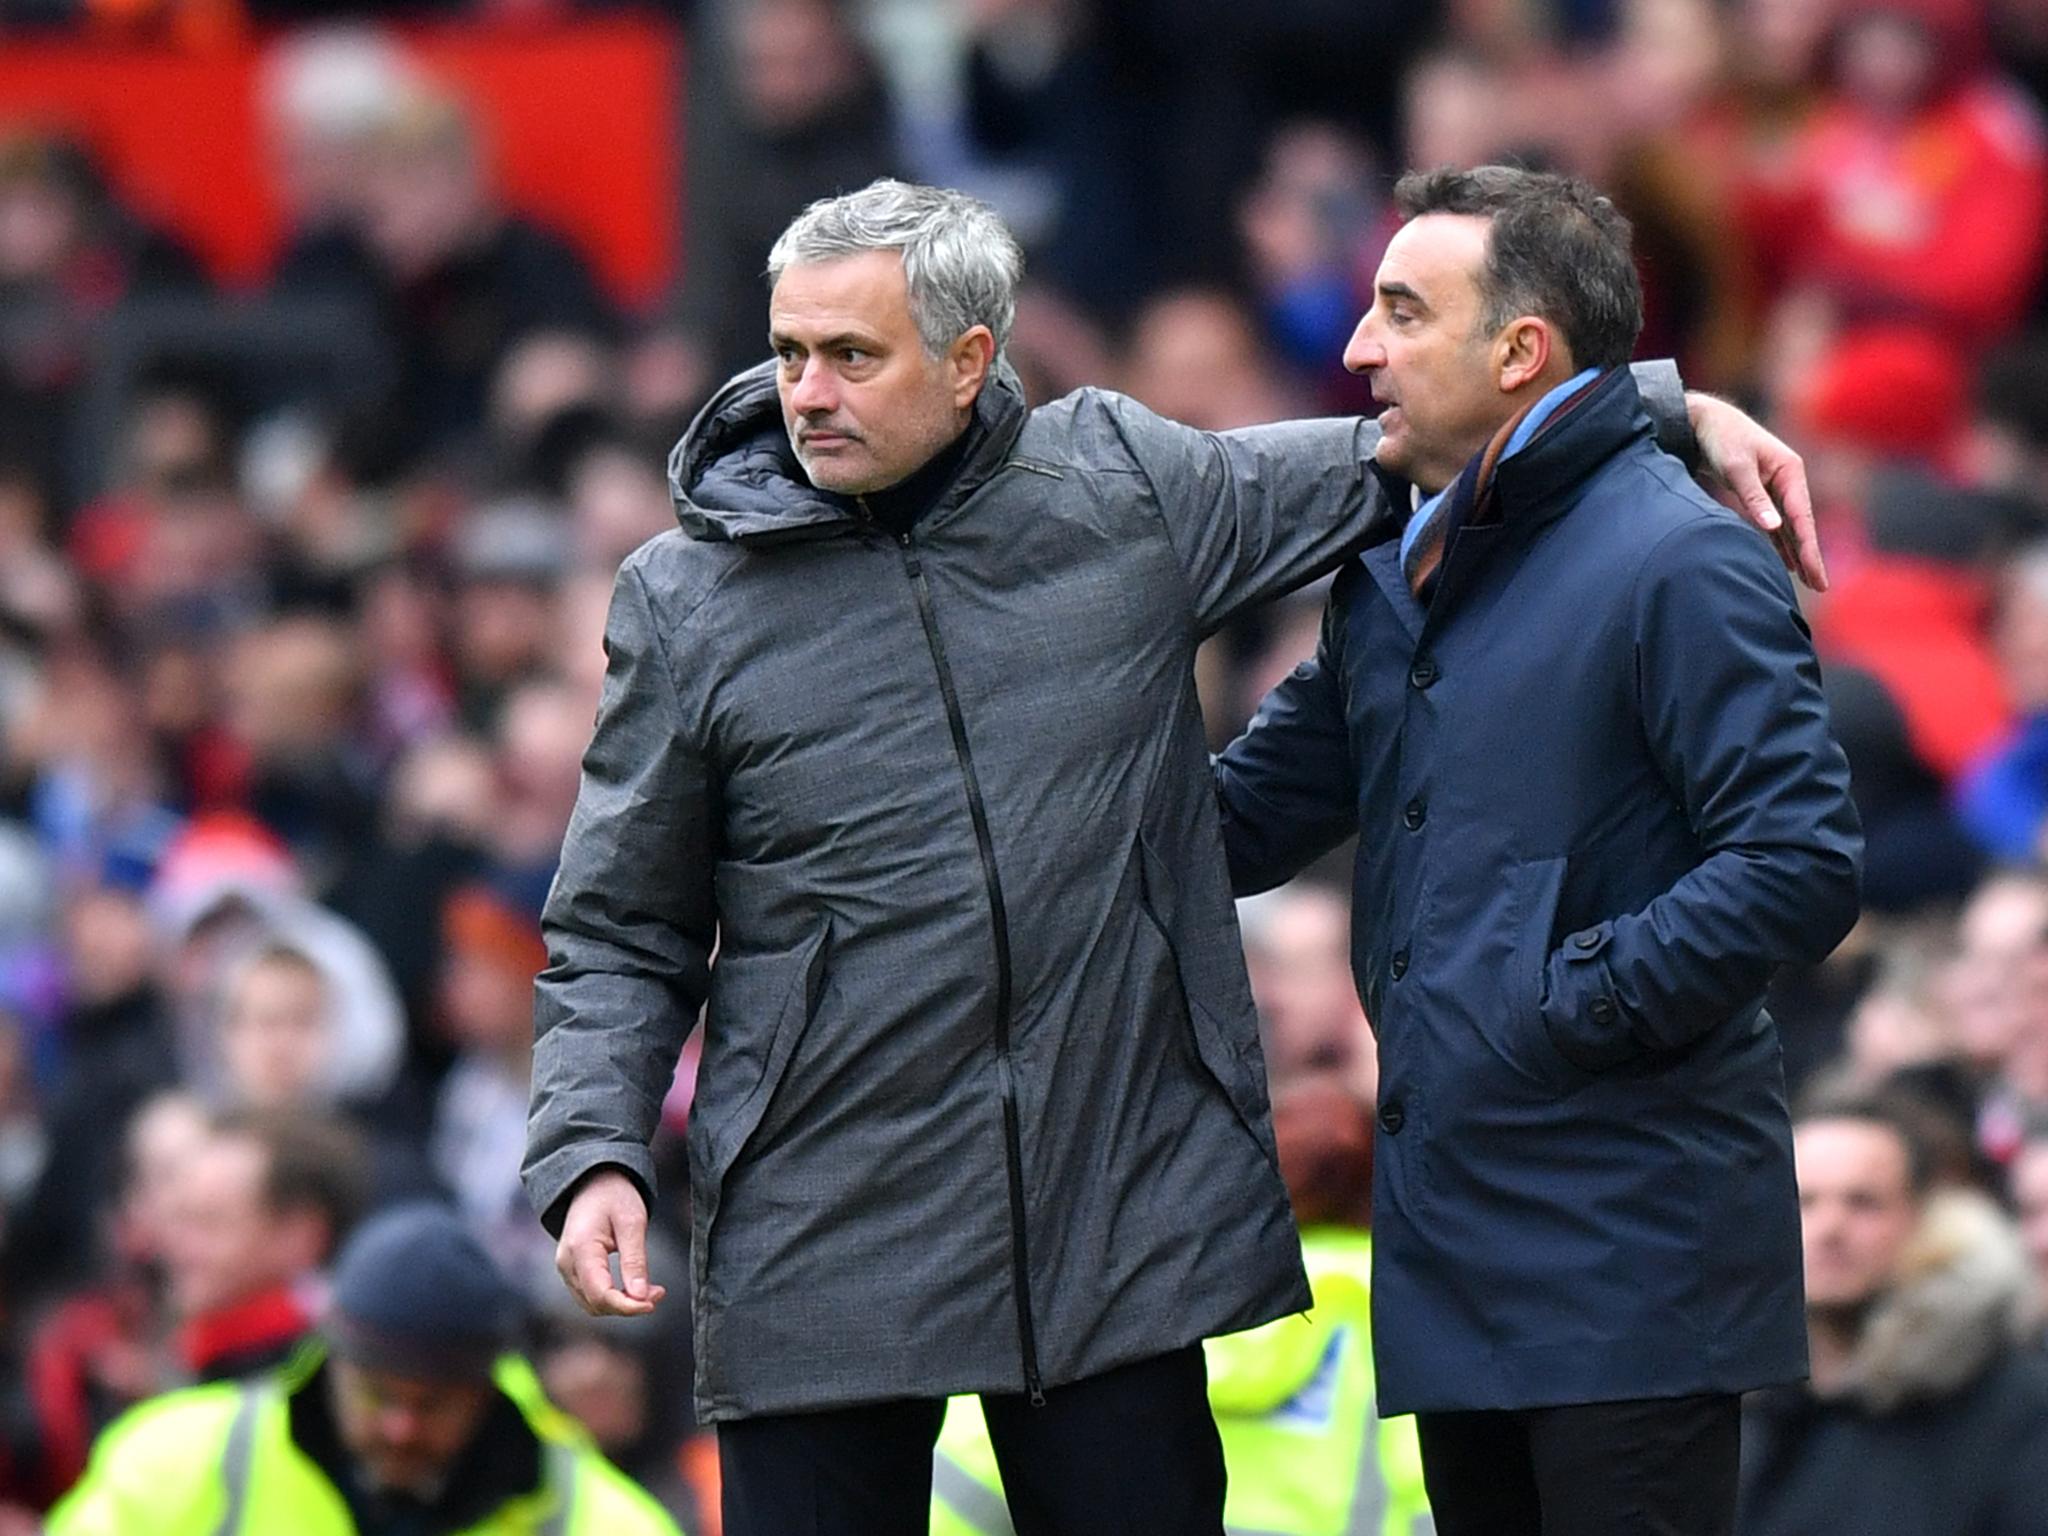 Jose Mourinho invites Carlos Carvalhal into press conference after Manchester United beat Swansea